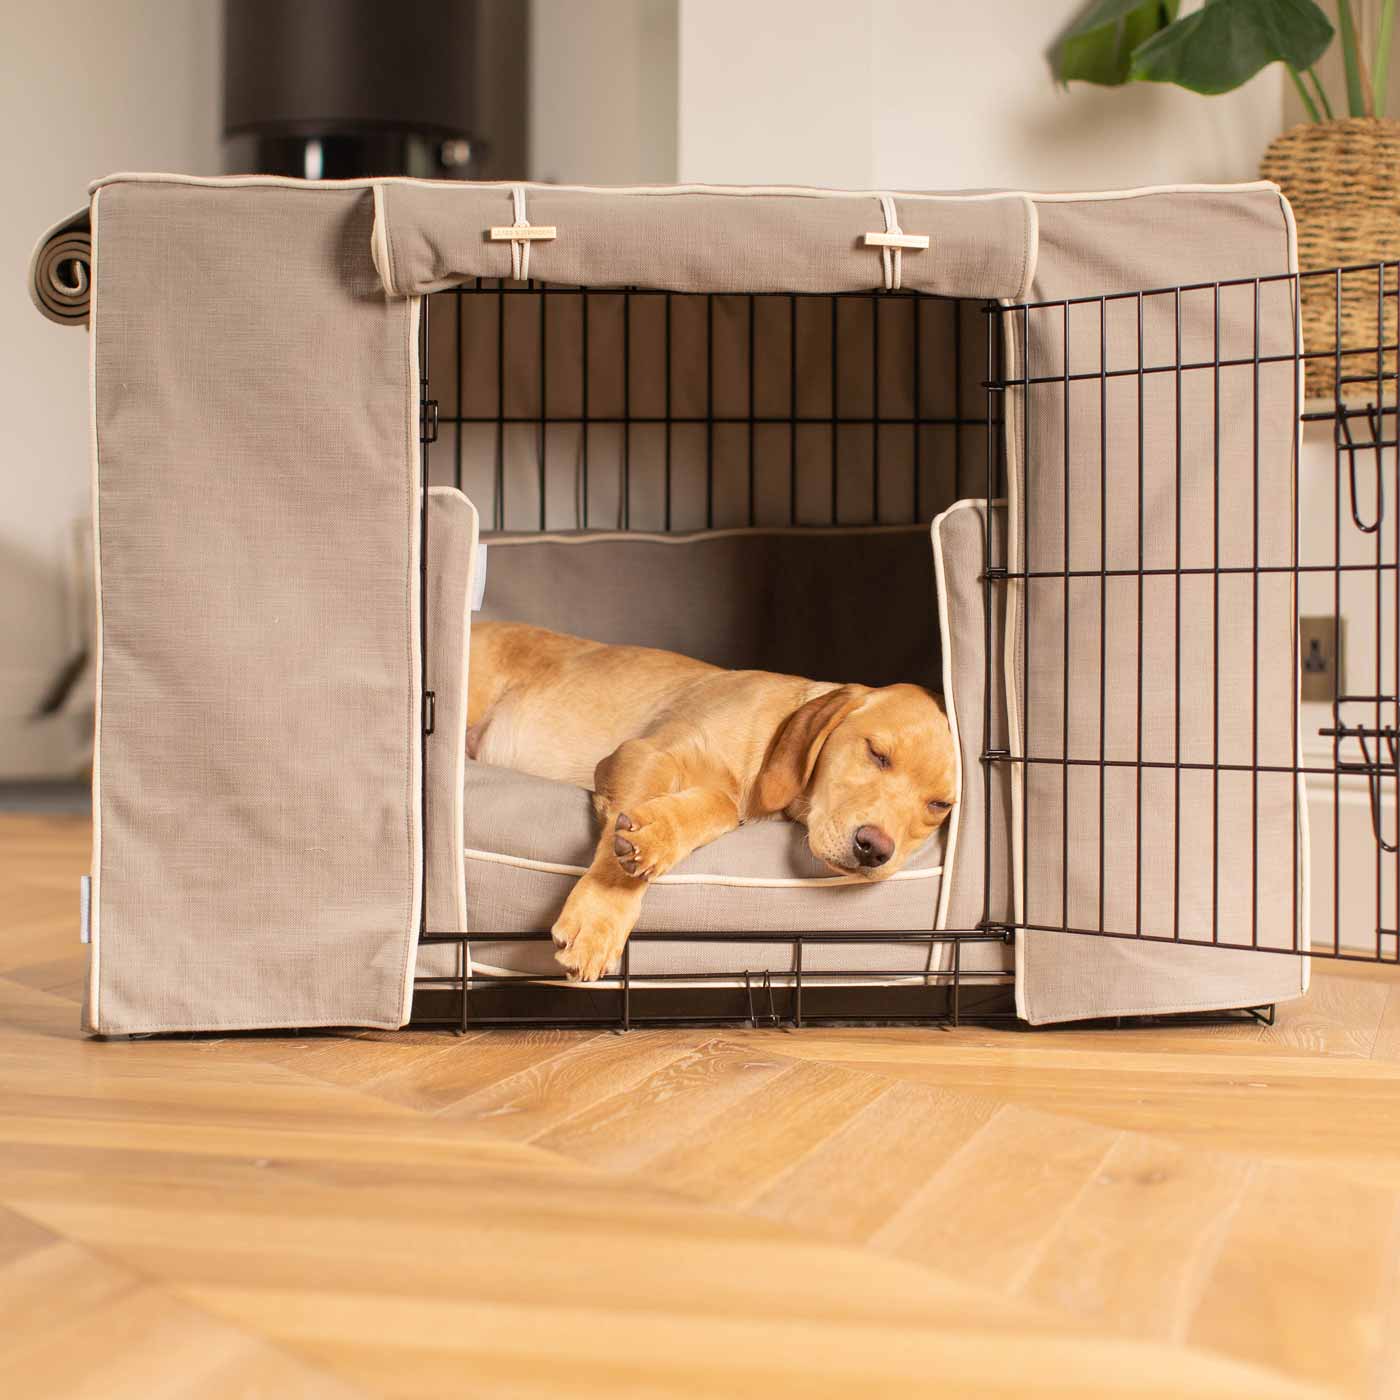 Dog Cage Set in Savanna Stone by Lords & Labradors